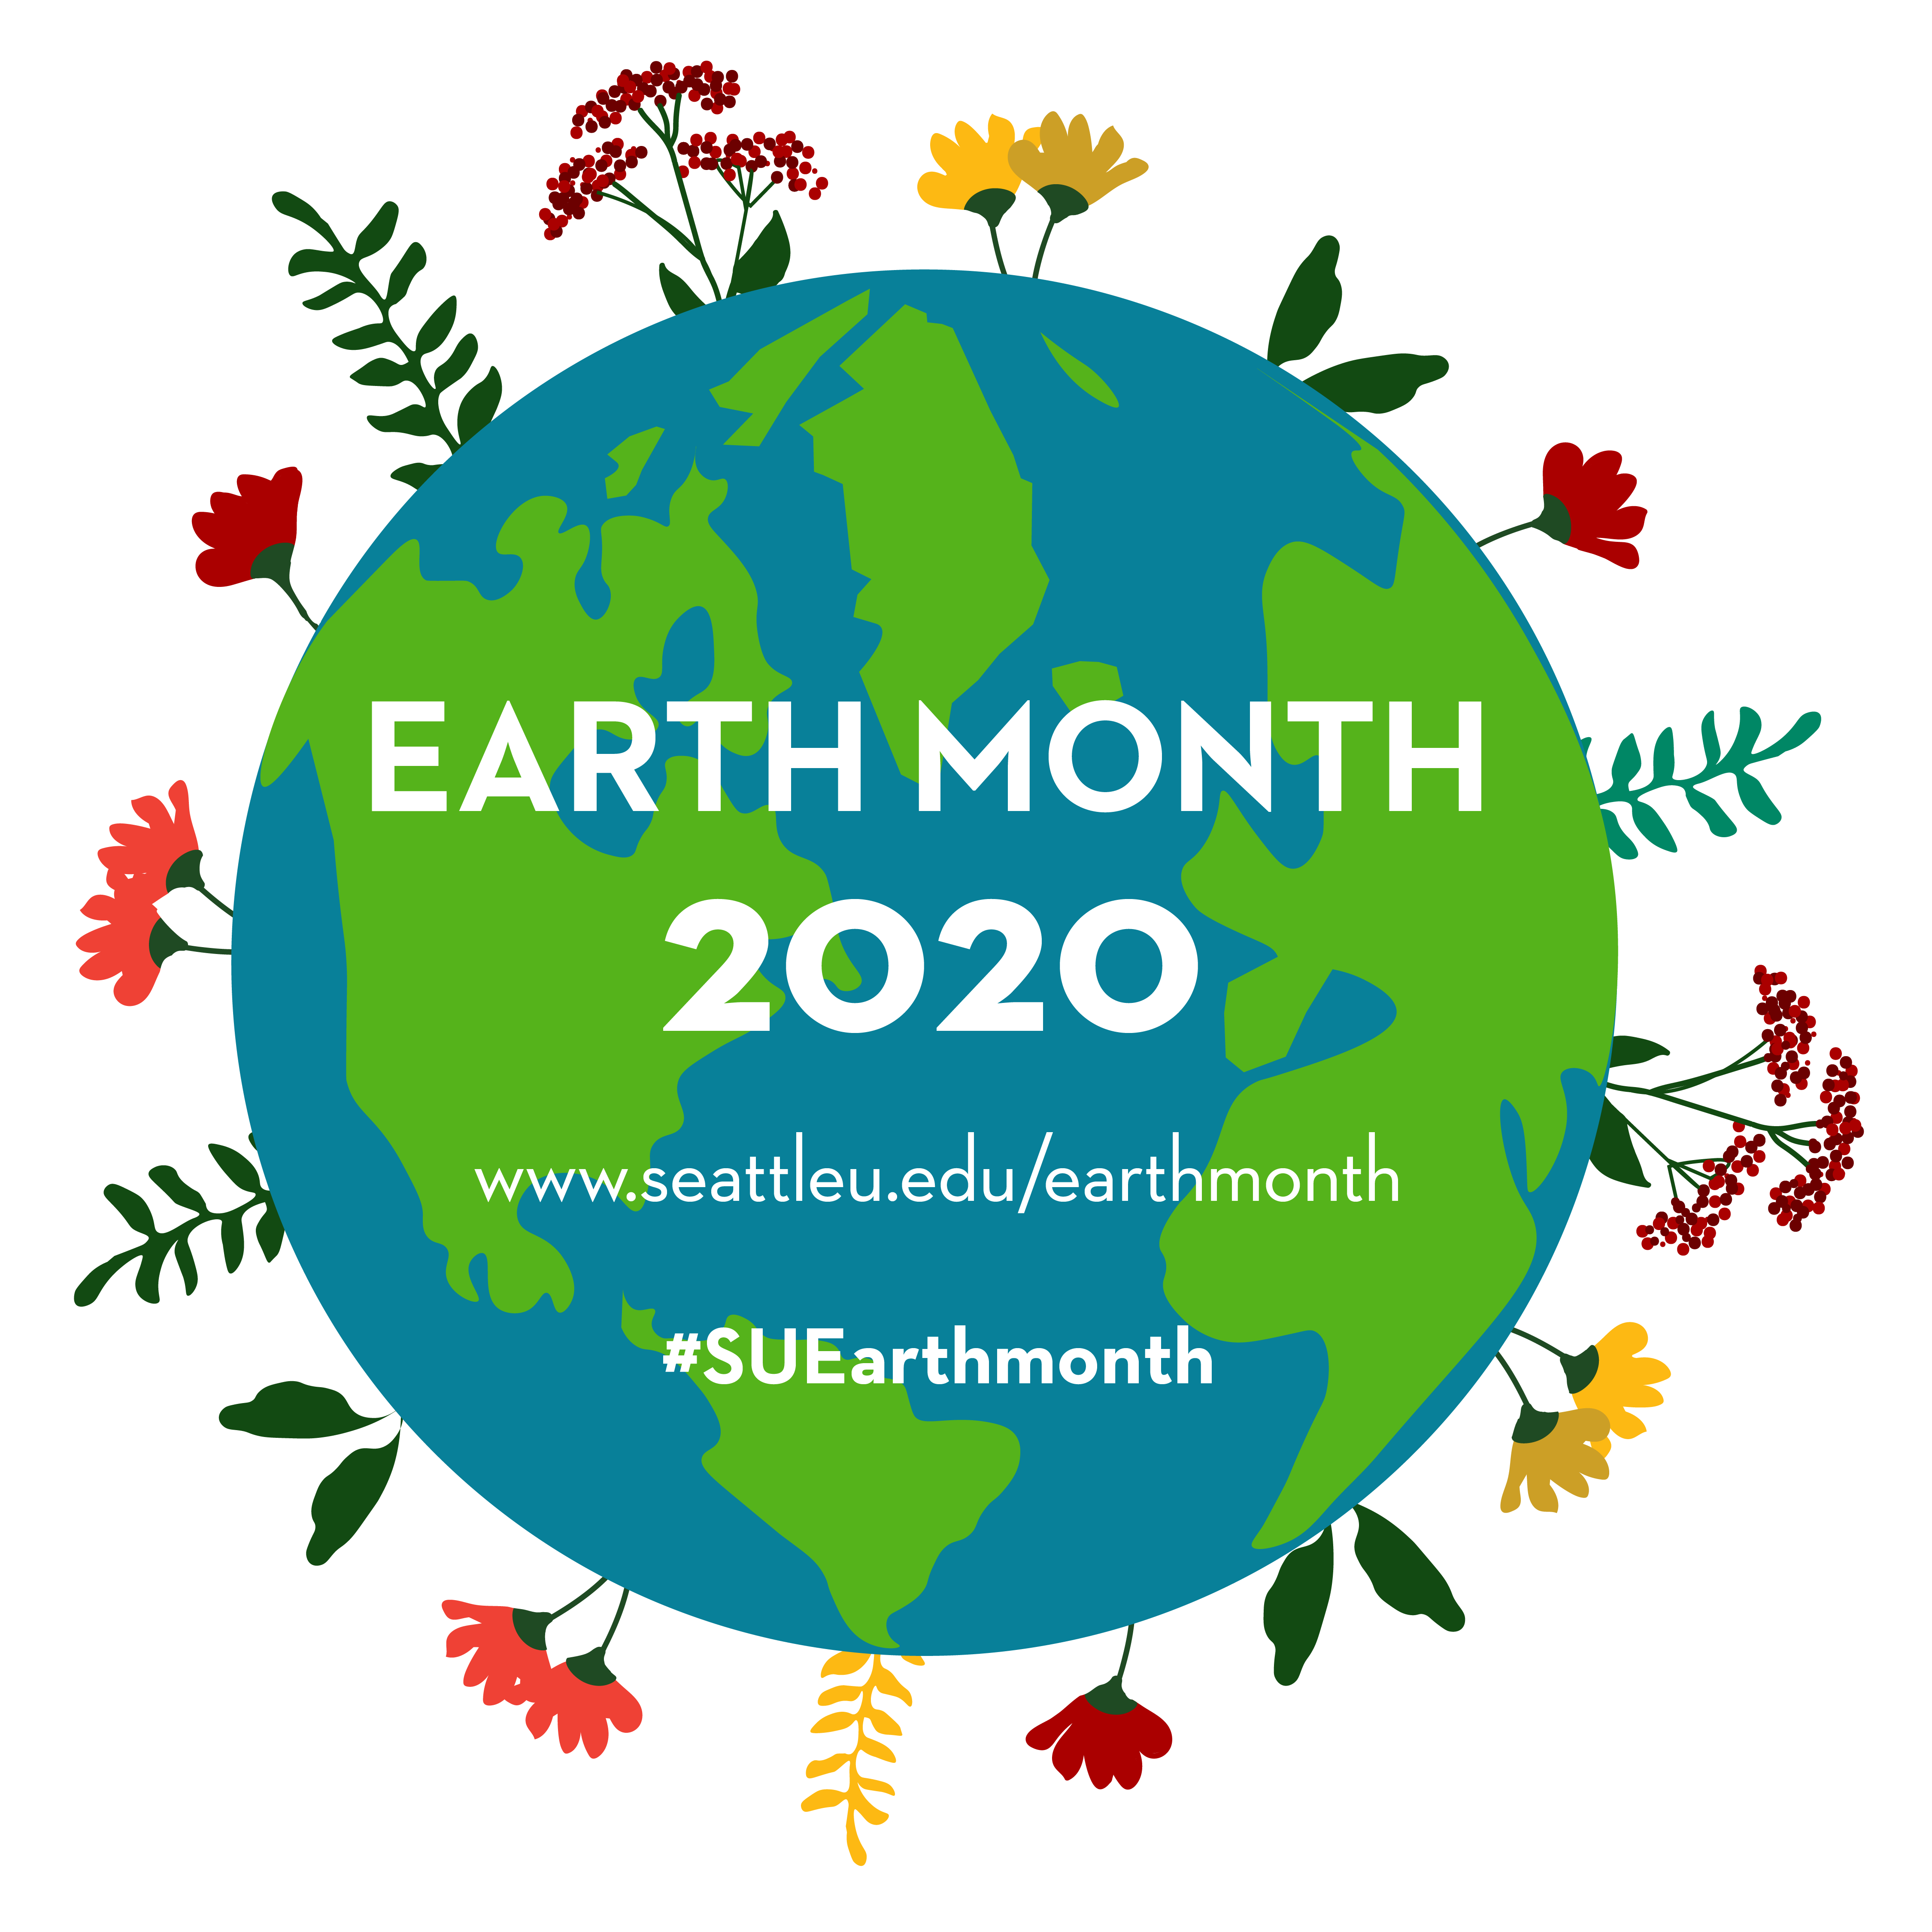 Earth Month logo competition: The winner is…